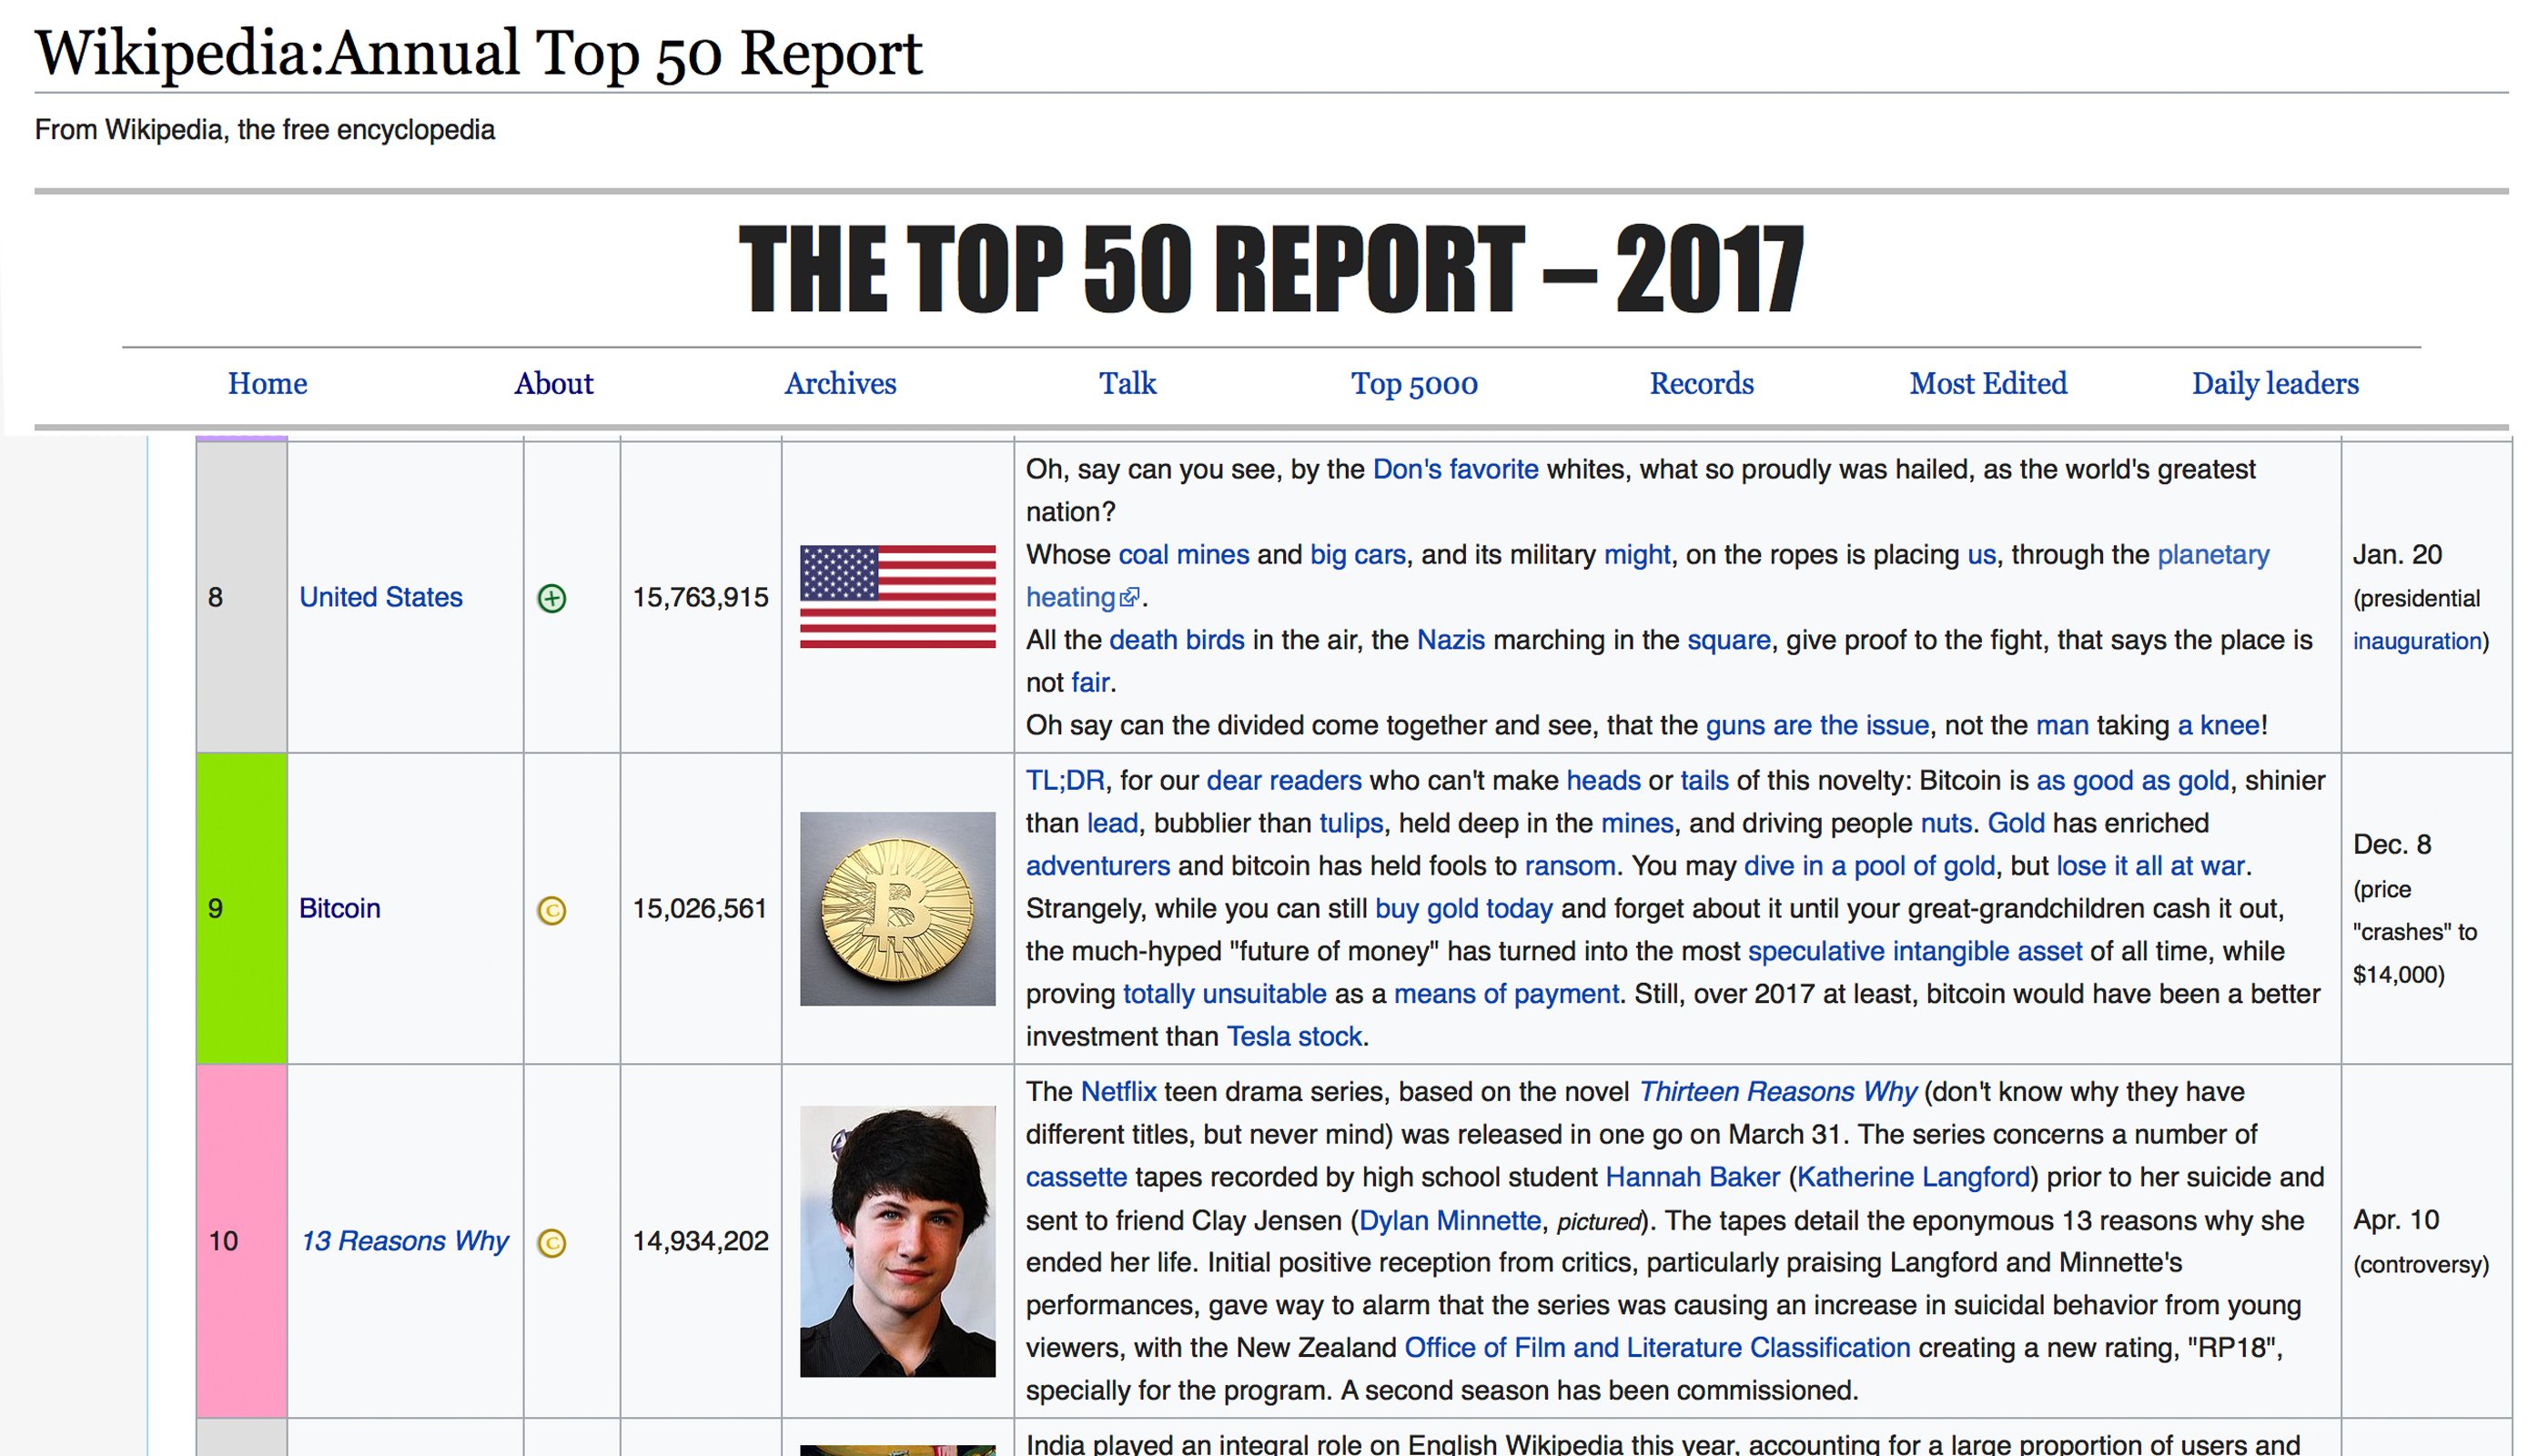 Bitcoin Was the Ninth Most Popular Wikipedia Article Last Year